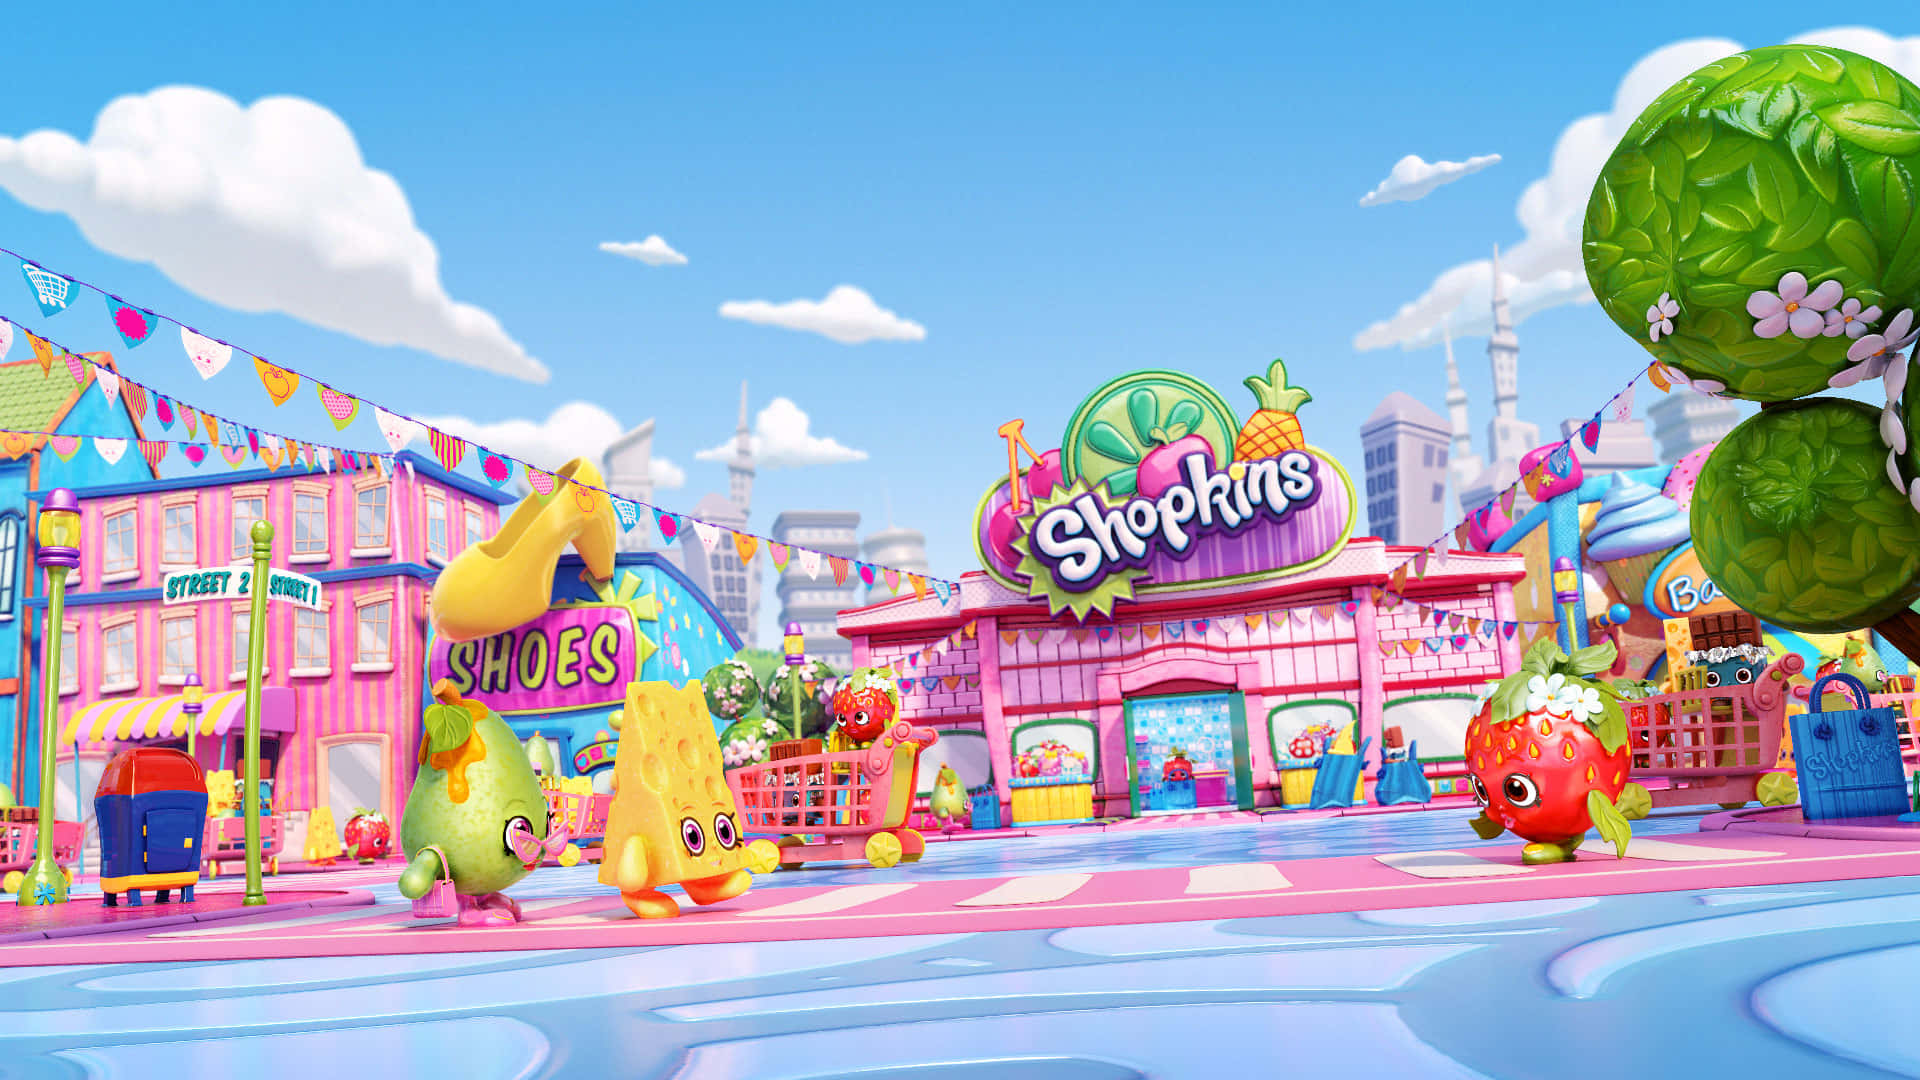 Join The Shopkins Adventure Today!